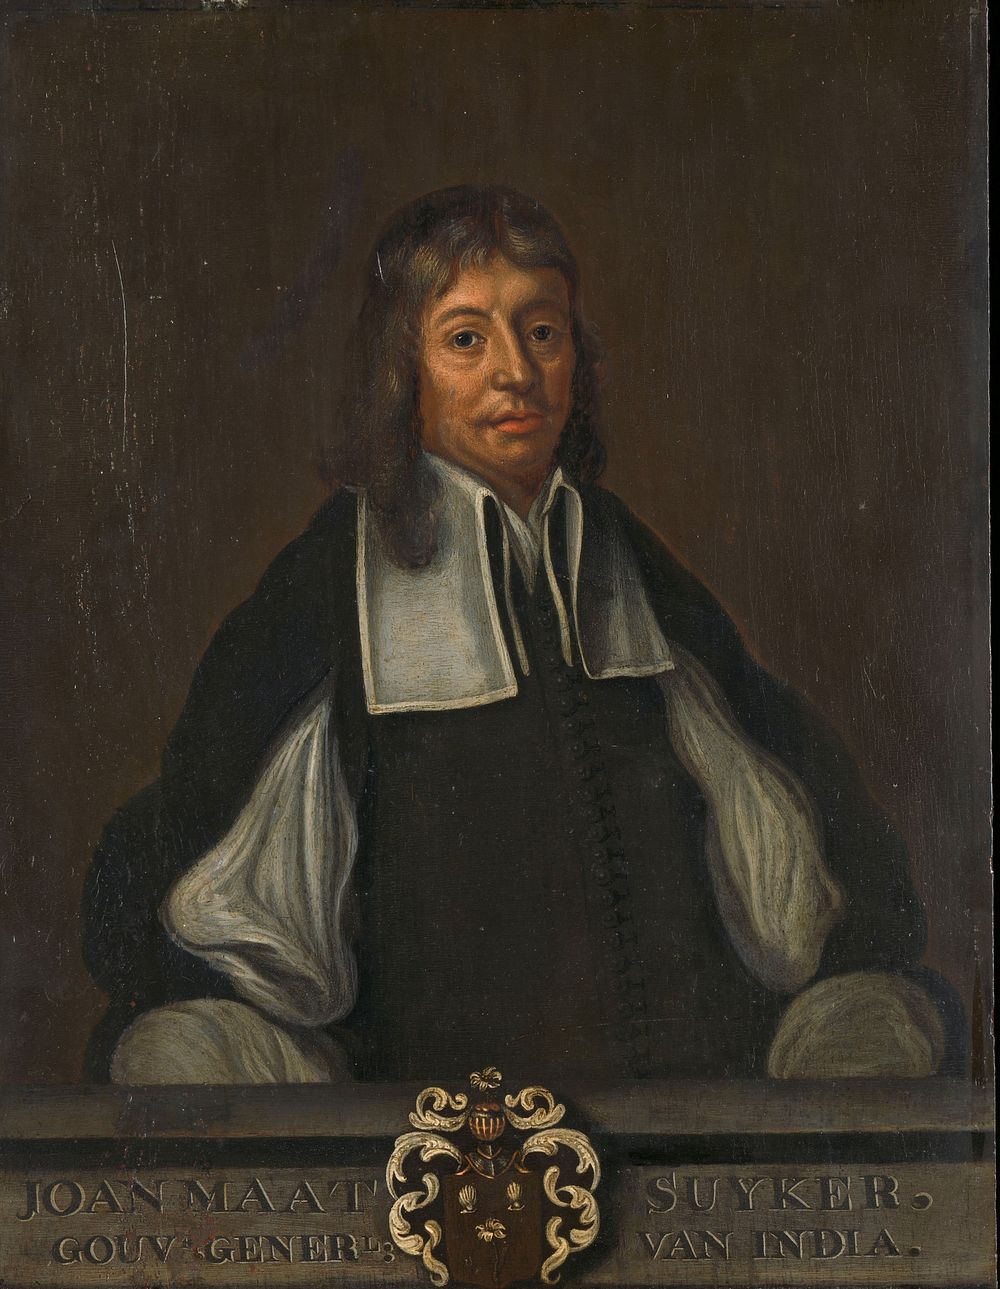 Portrait of Joan Maetsuyker, Governor-General of the Dutch East Indies (1750 - 1800) by Jacob Coeman